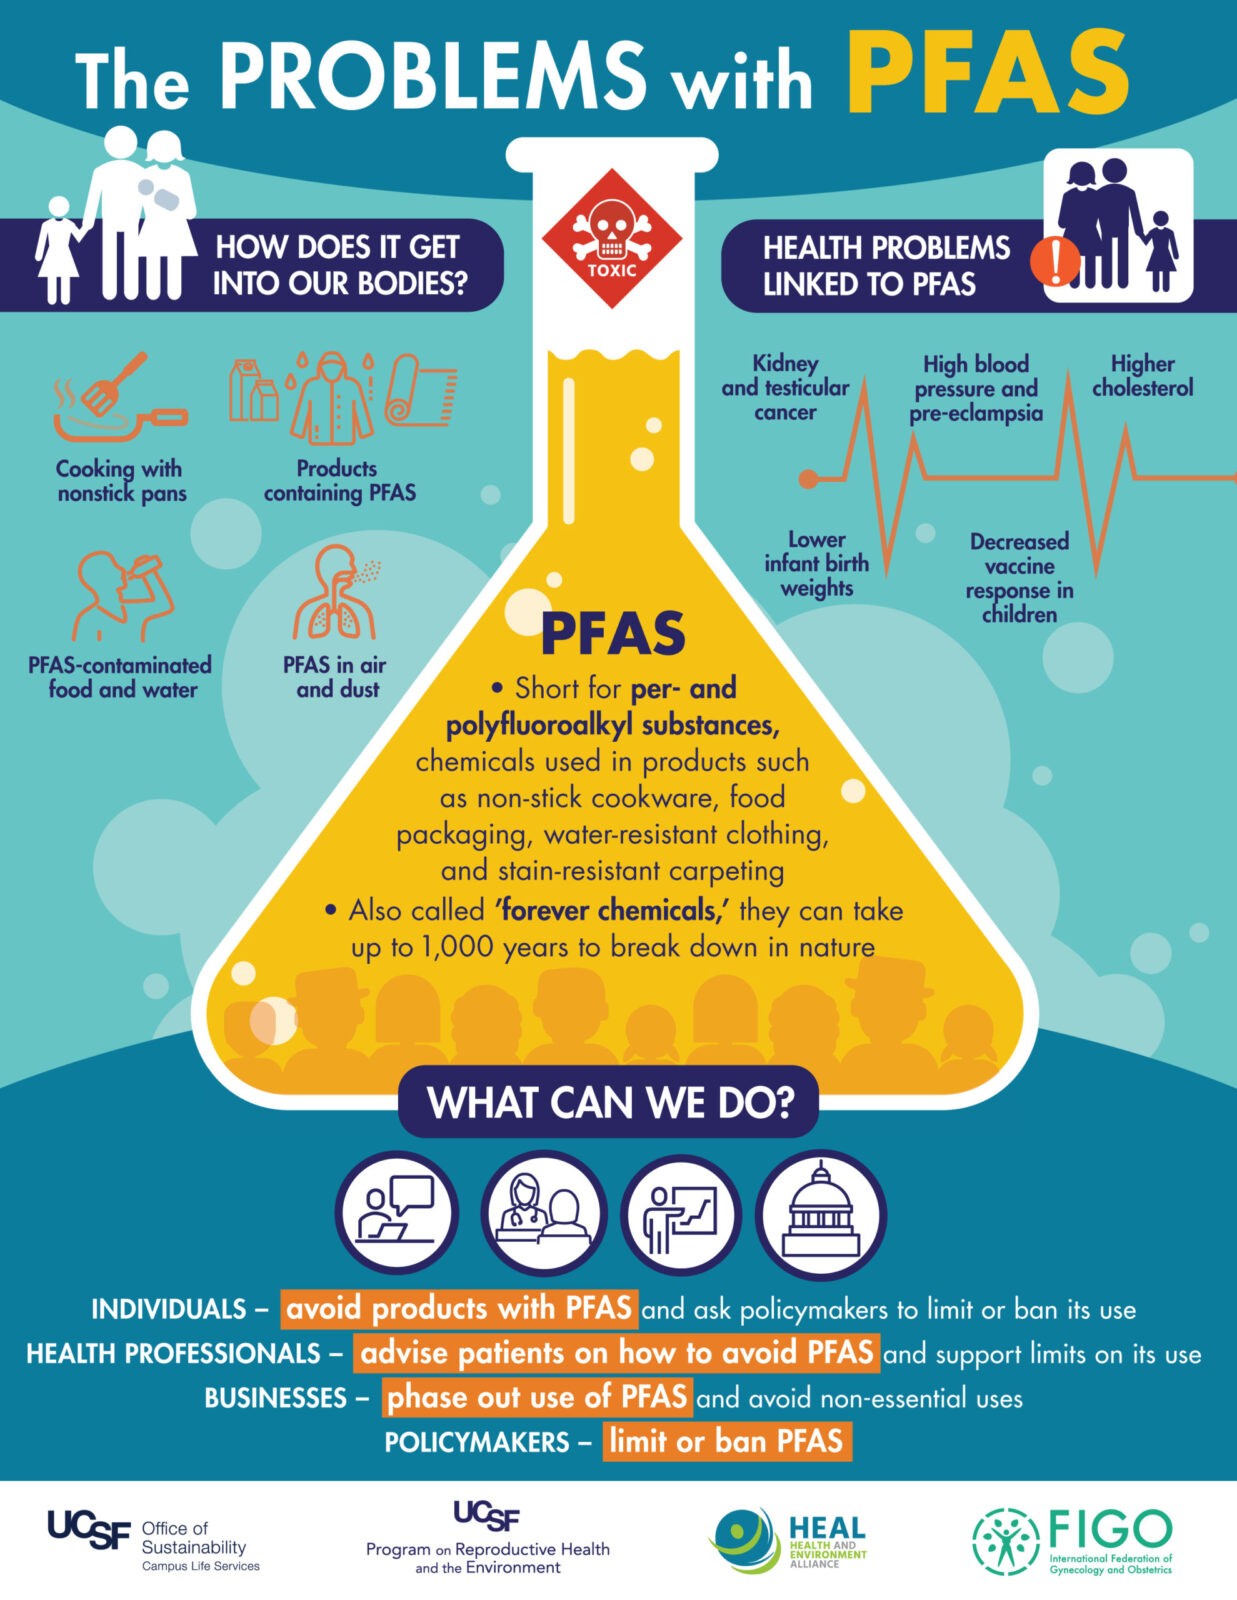 Health and Environment Alliance  How PFAS chemicals affect women,  pregnancy and human development: Health actors call for urgent action to  phase them out